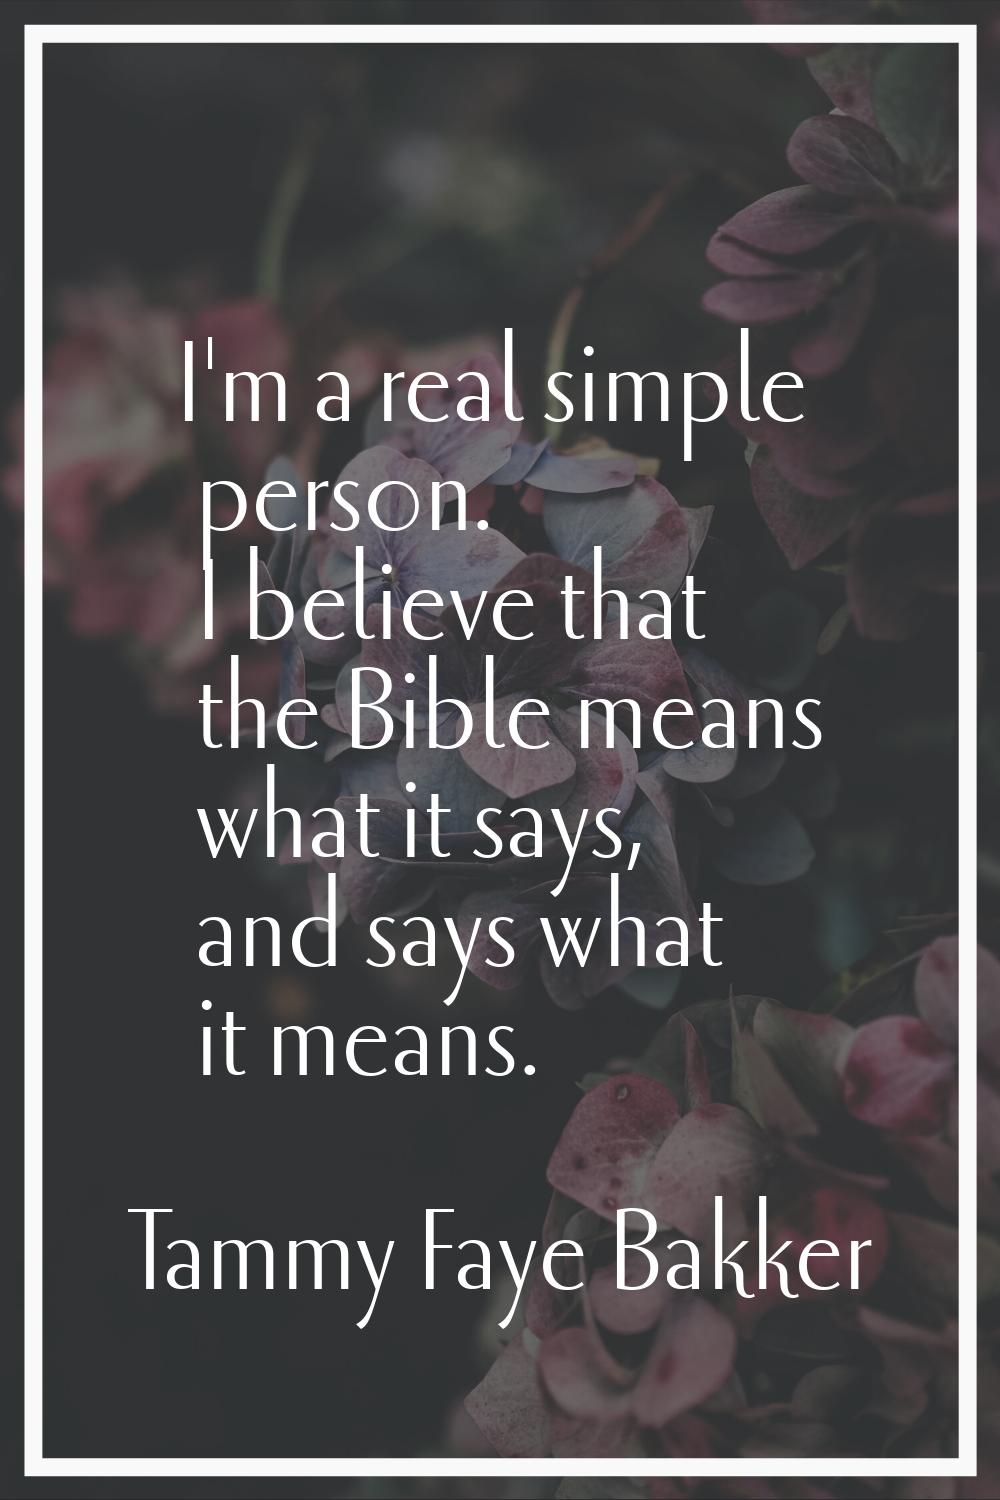 I'm a real simple person. I believe that the Bible means what it says, and says what it means.